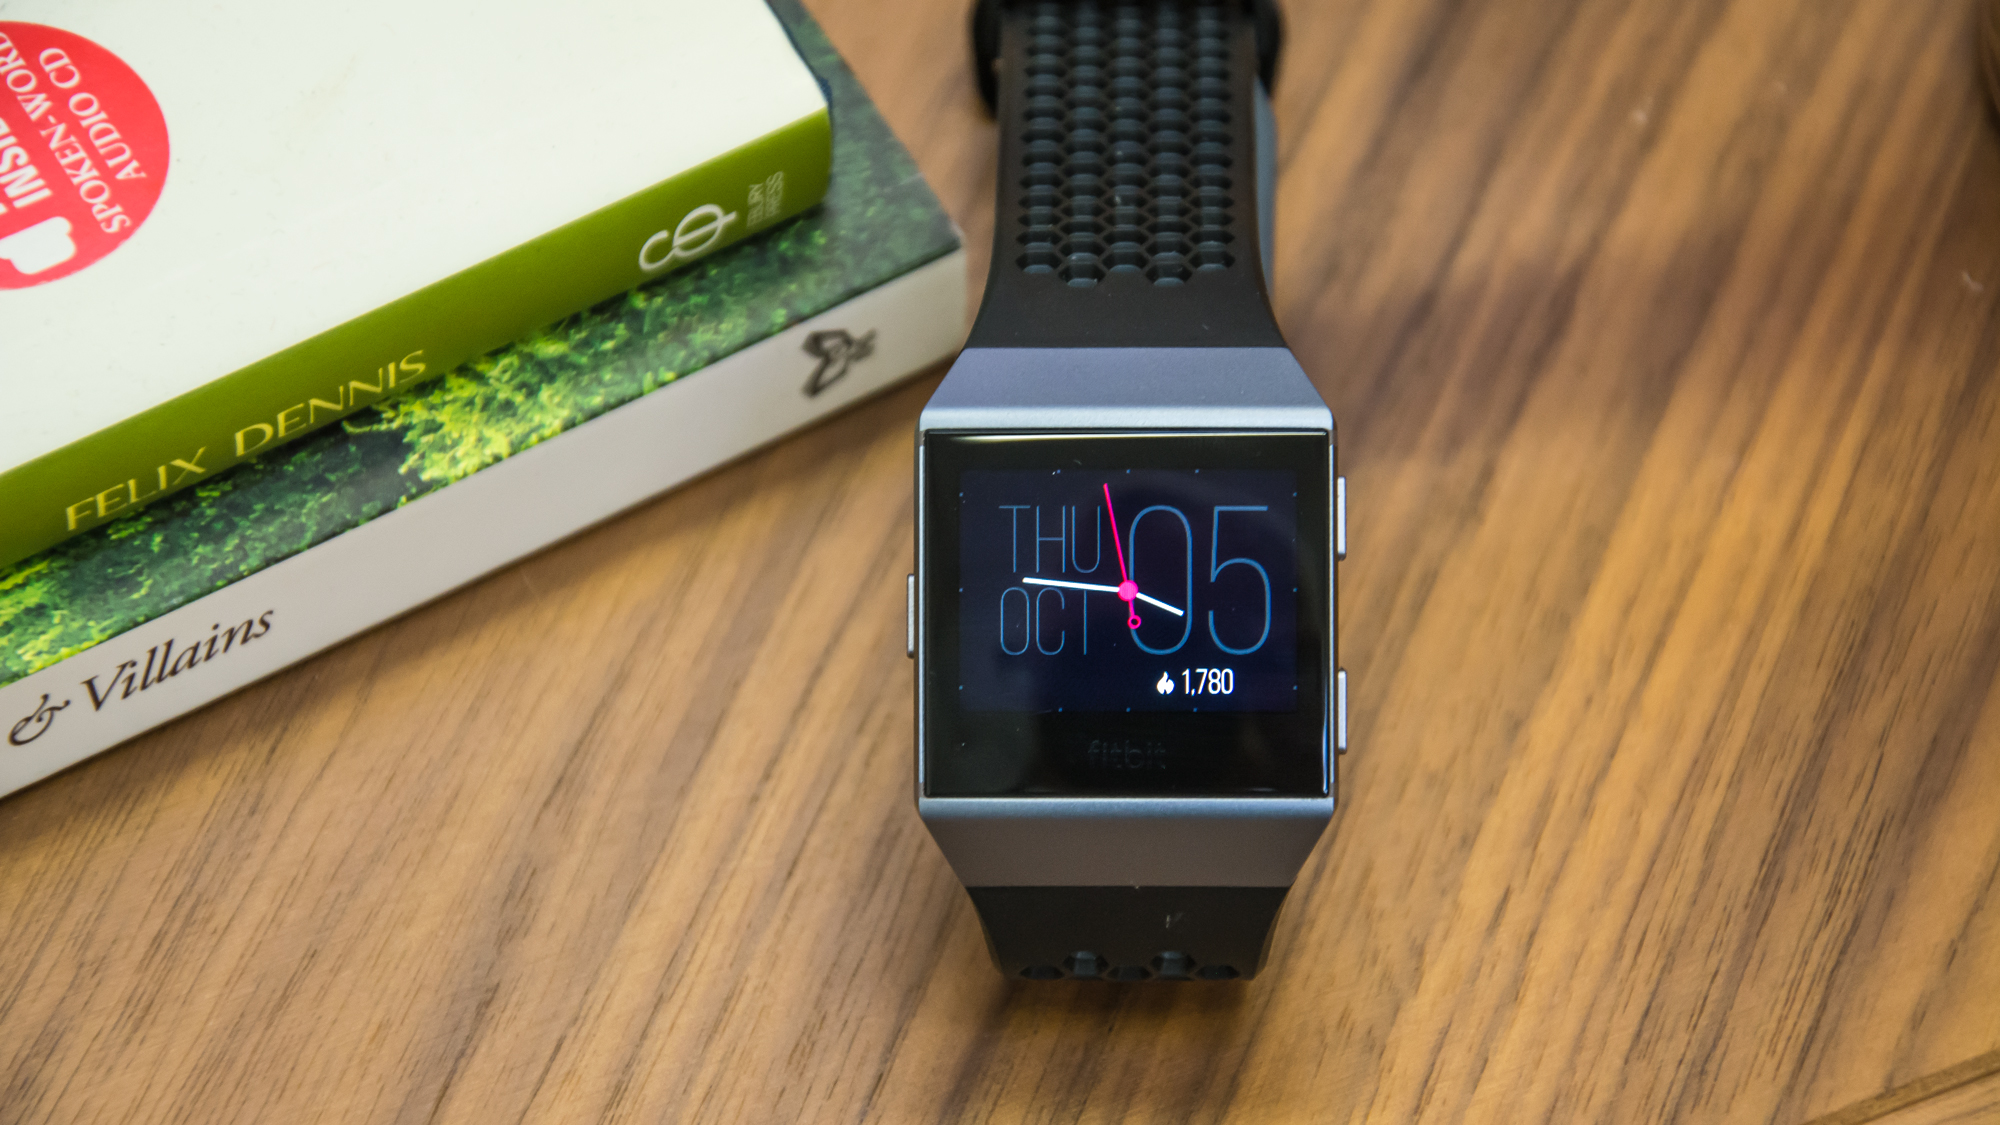 Ionic Great battery life, beautiful – but is this really a smartwatch?